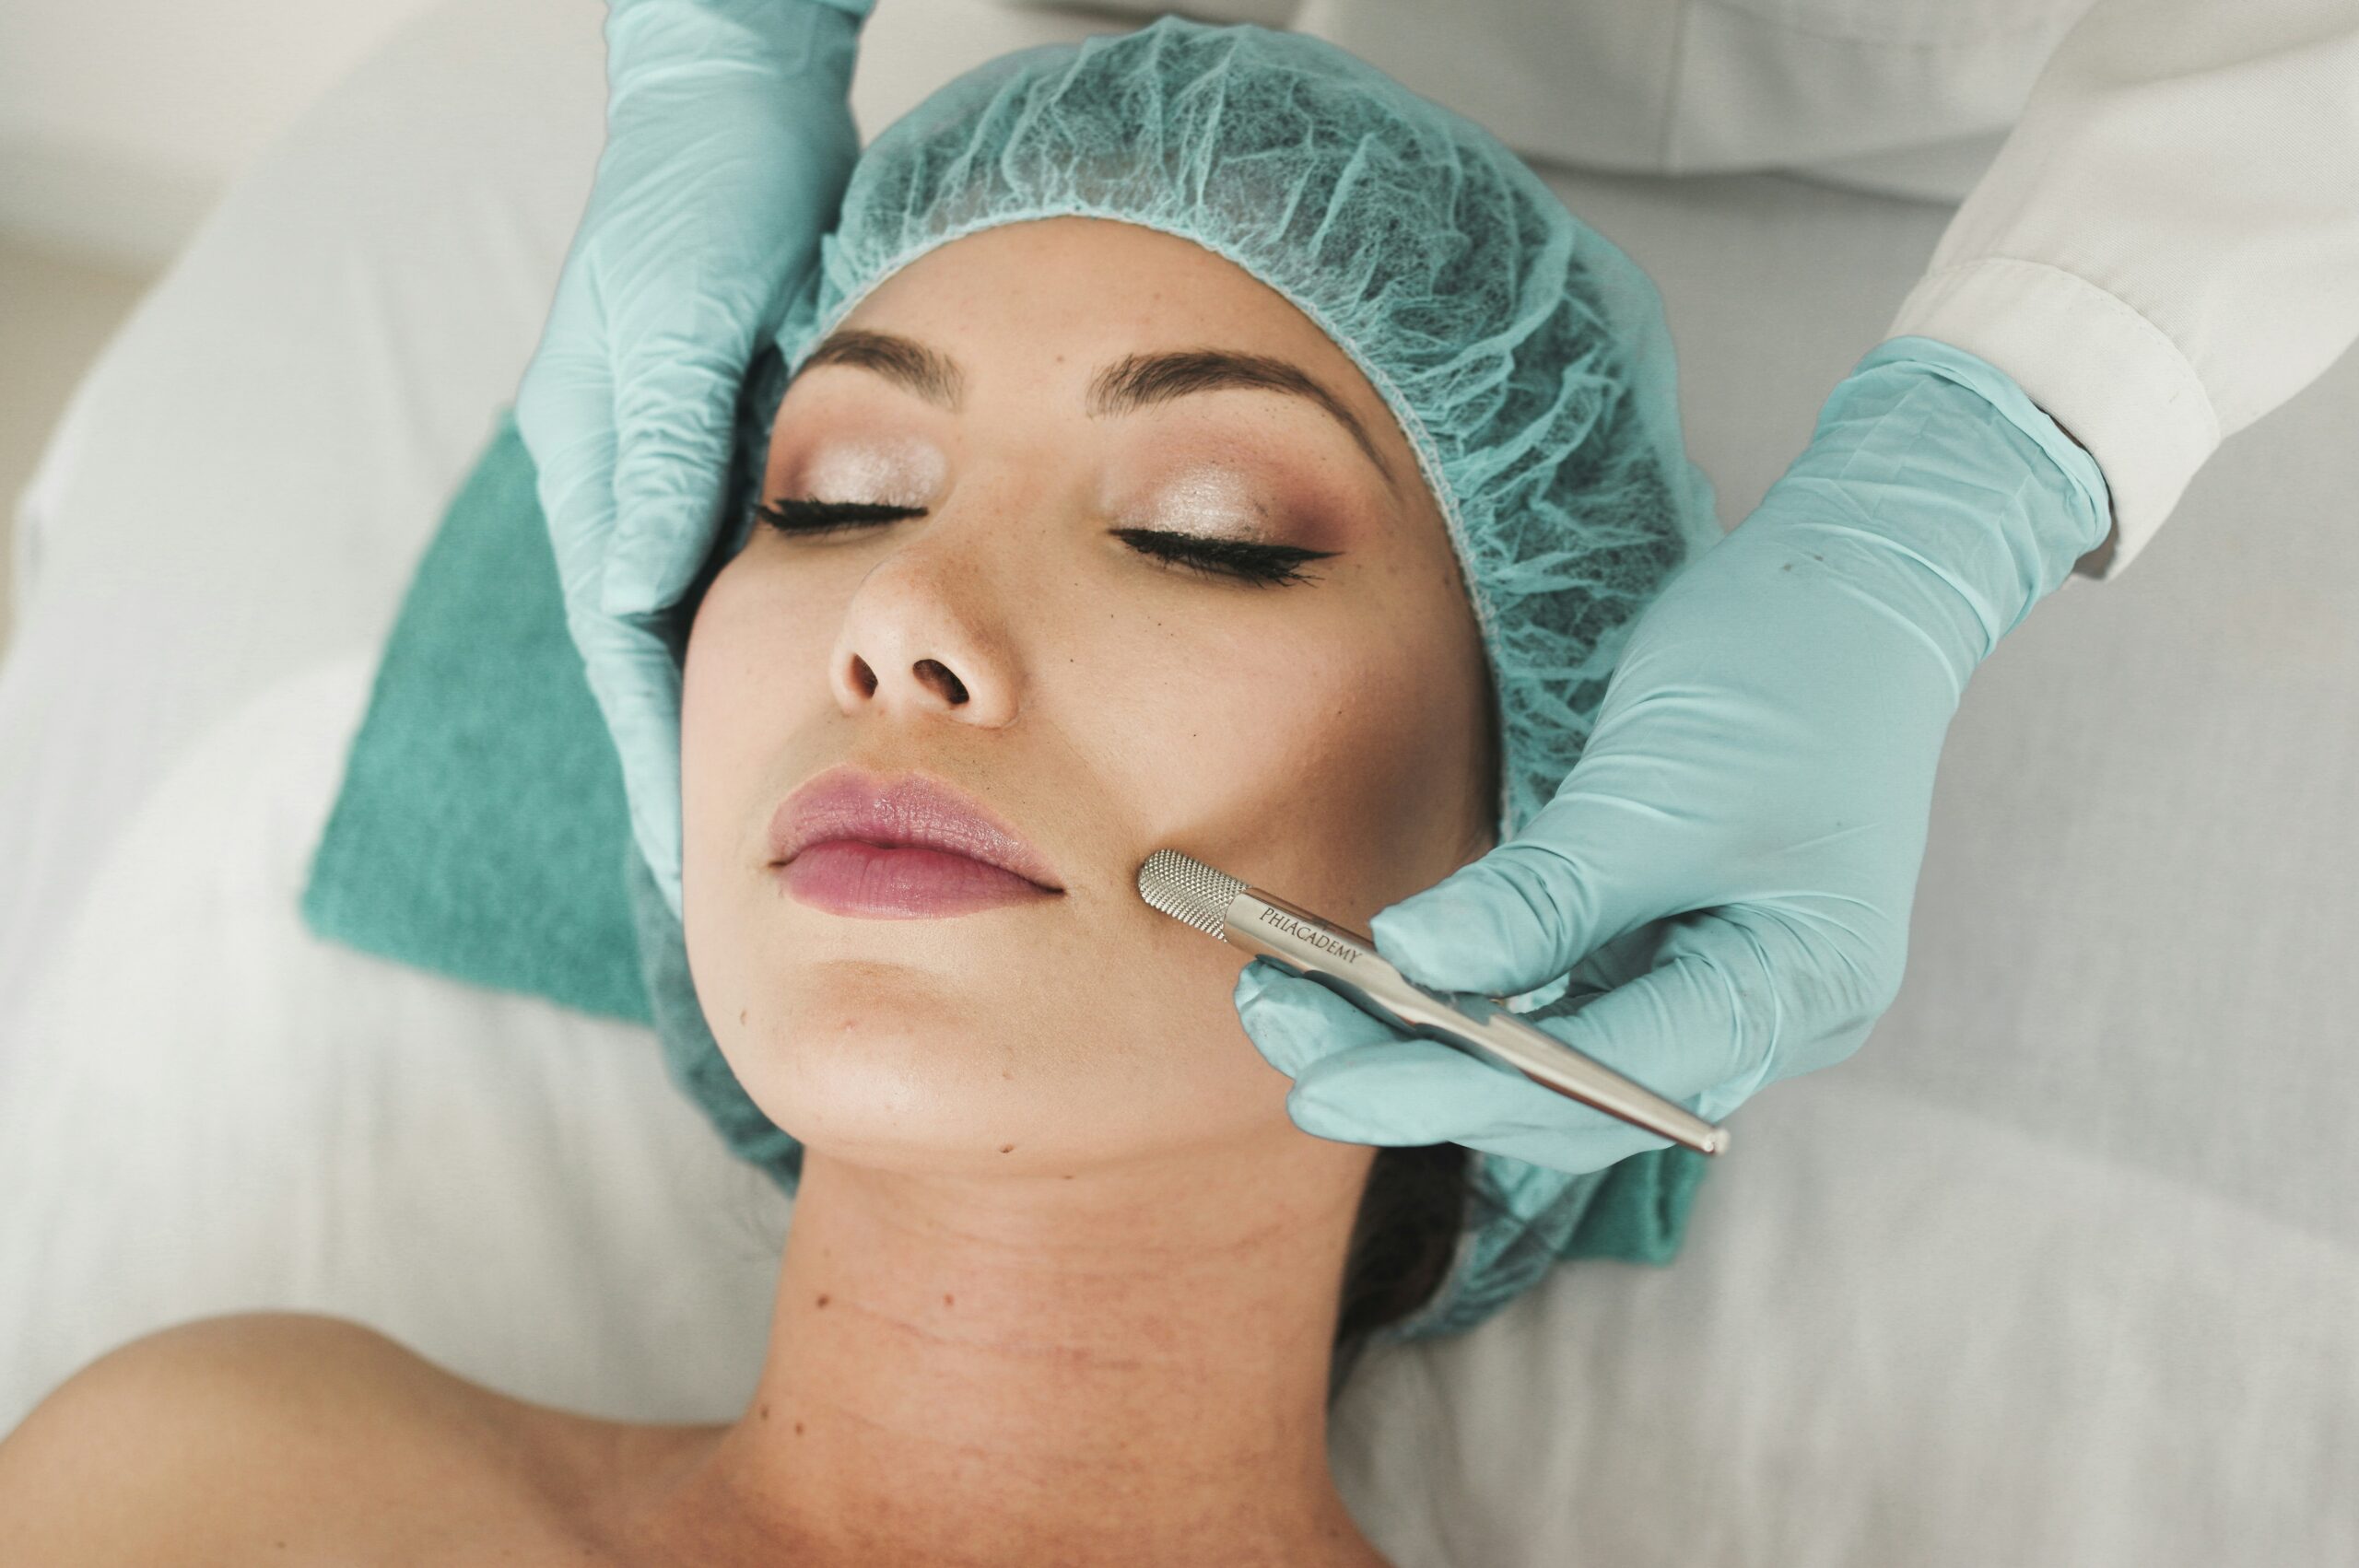 Person wearing a teal hair net getting a microdermabrasion treatment